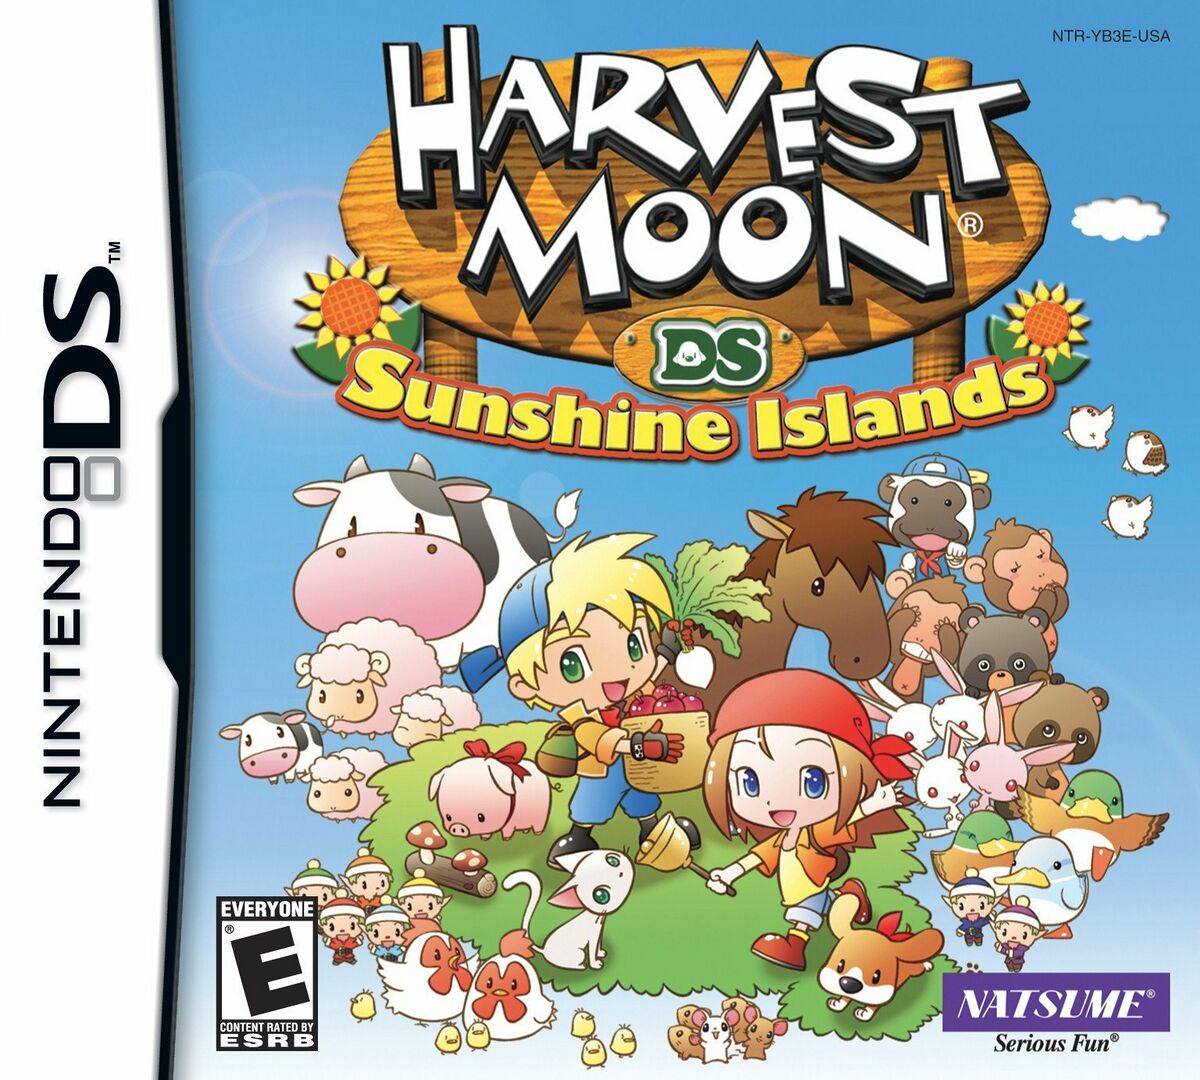 harvest-moon-ds-sunshine-islands-strategywiki-strategy-guide-and